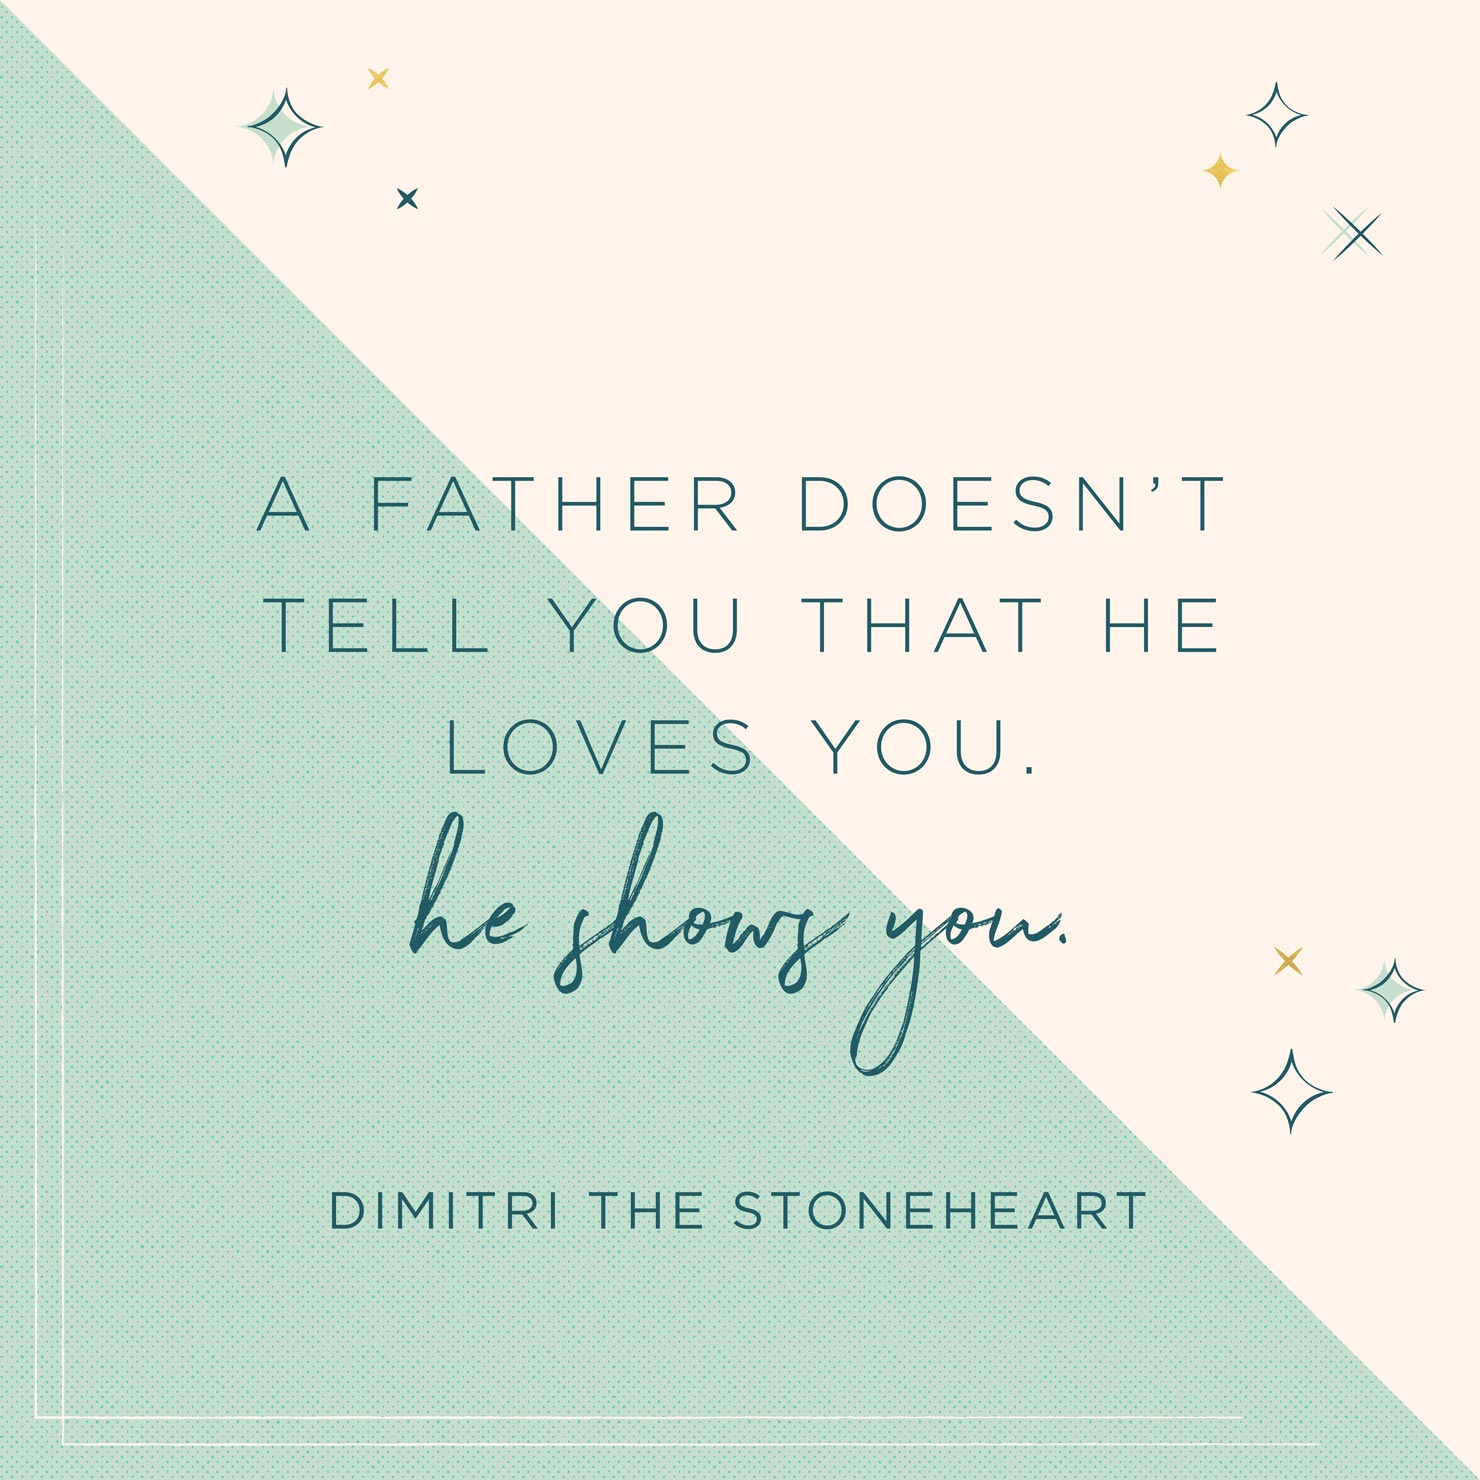 a father doesn’t tell you that the loves you. he shows you. dimitri the stoneheart